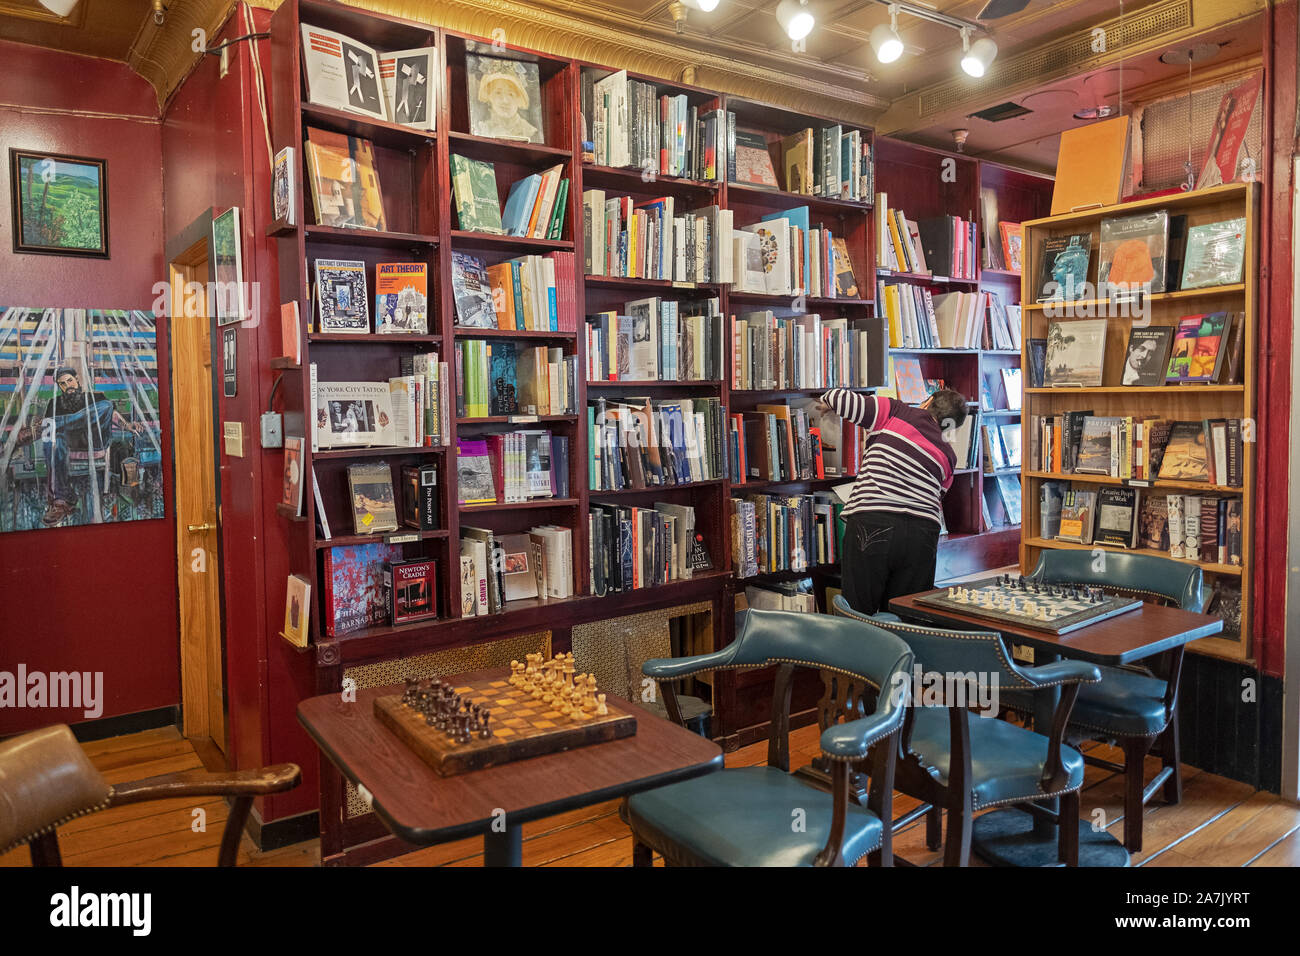 The cozy friendly interior of the INQUIRING MIND BOOKSTORE in Saugerties, New York. Stock Photo